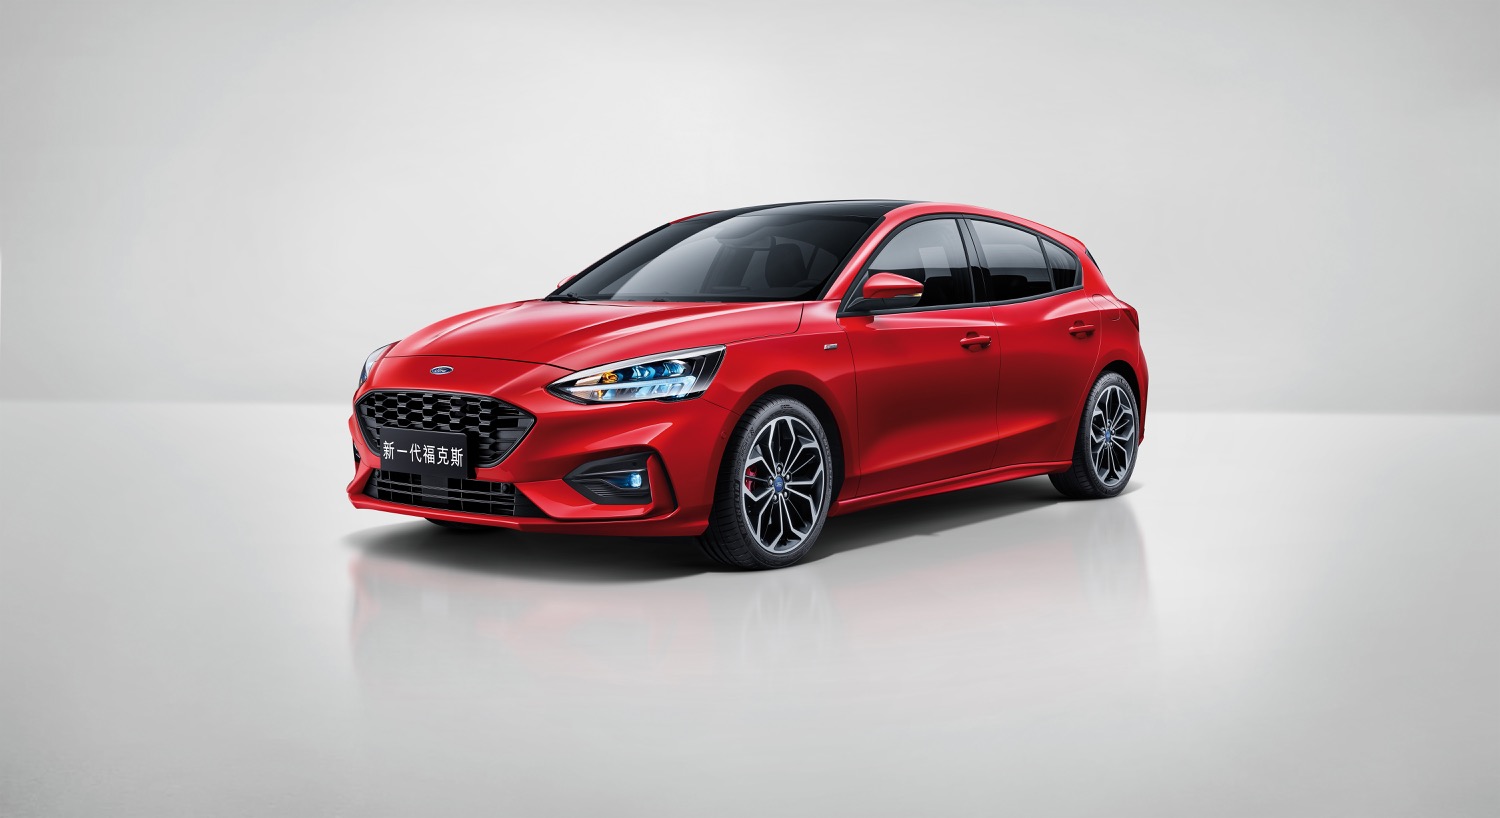 New Ford Focus, Escort Important In China